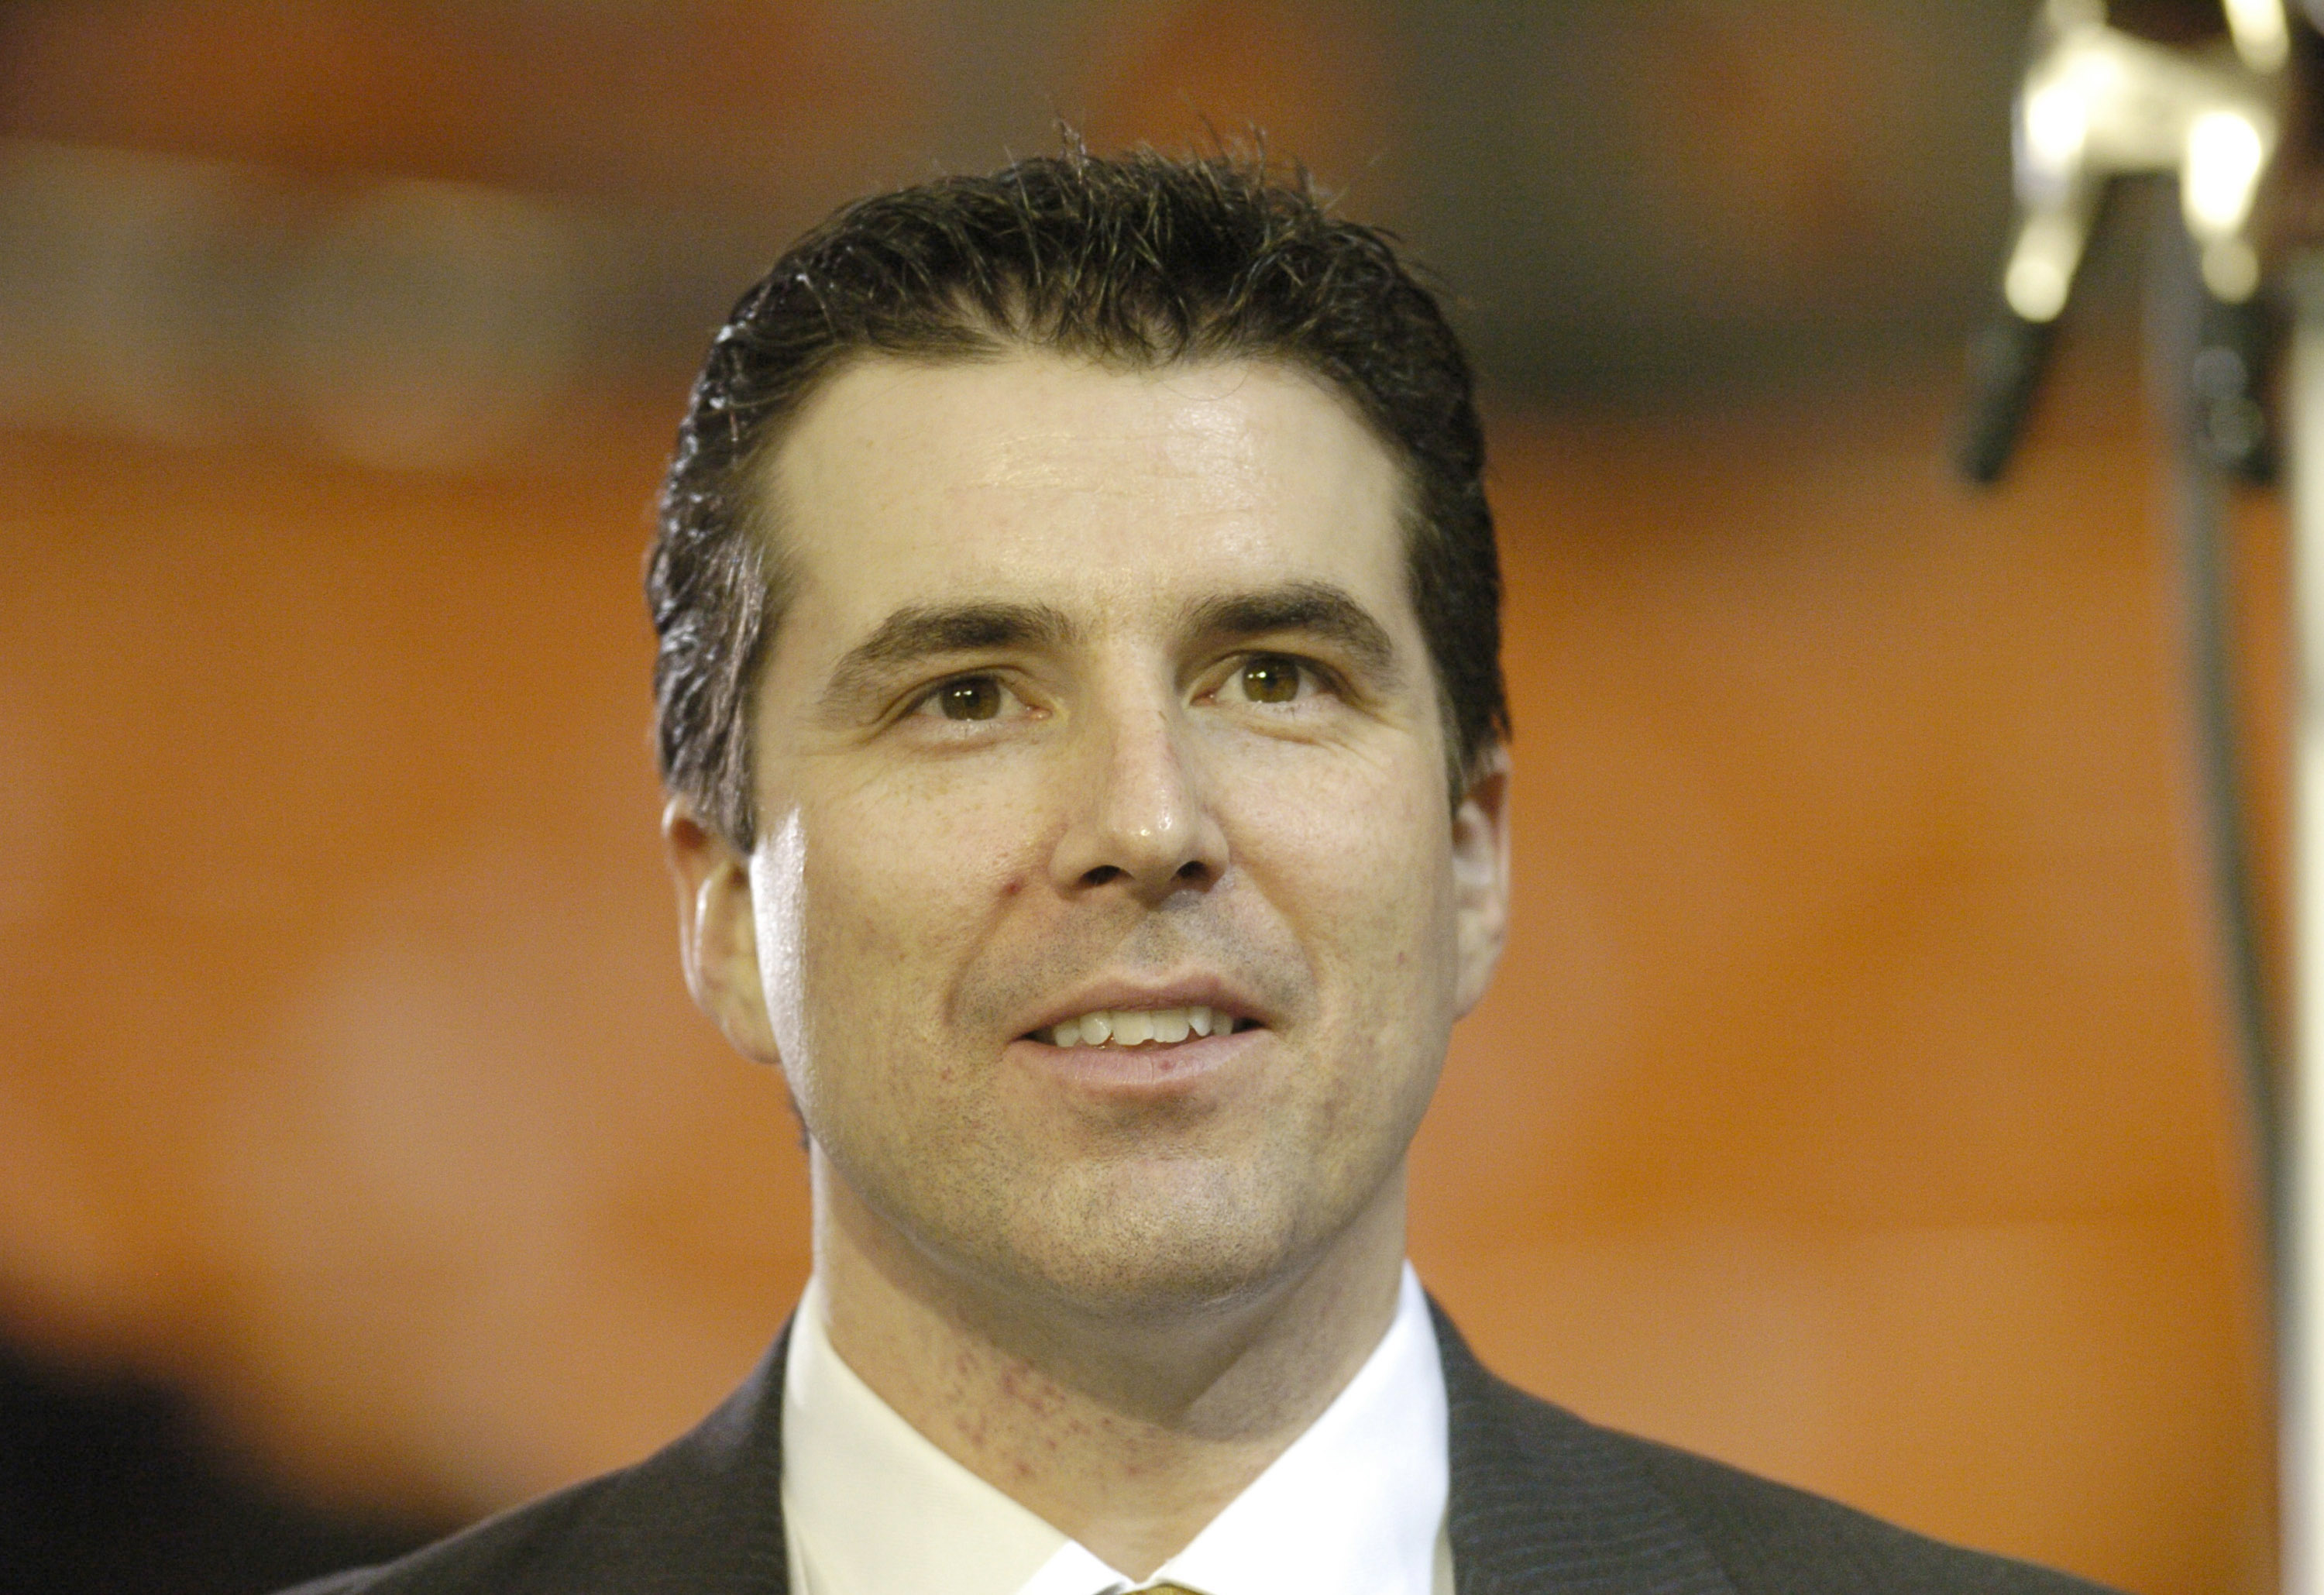 ESPN analyst Rece Davis during the FedEx Orange Bowl National Championship at Pro Player Stadium in Miami, Florida on January 4, 2005. (Photo by A. Messerschmidt/Getty Images)